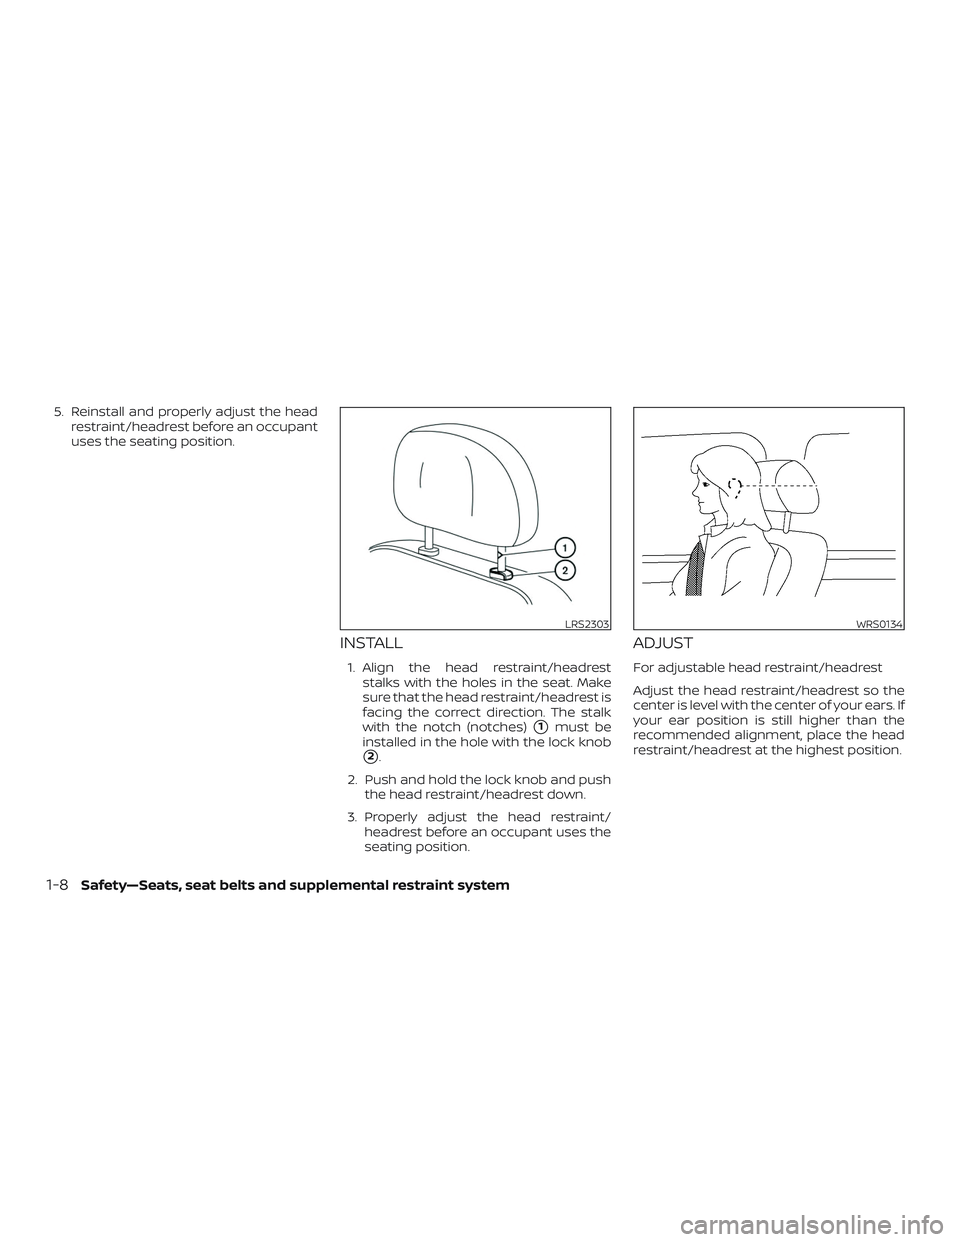 NISSAN VERSA 2019  Owners Manual 5. Reinstall and properly adjust the headrestraint/headrest before an occupant
uses the seating position.
INSTALL
1. Align the head restraint/headreststalks with the holes in the seat. Make
sure that 